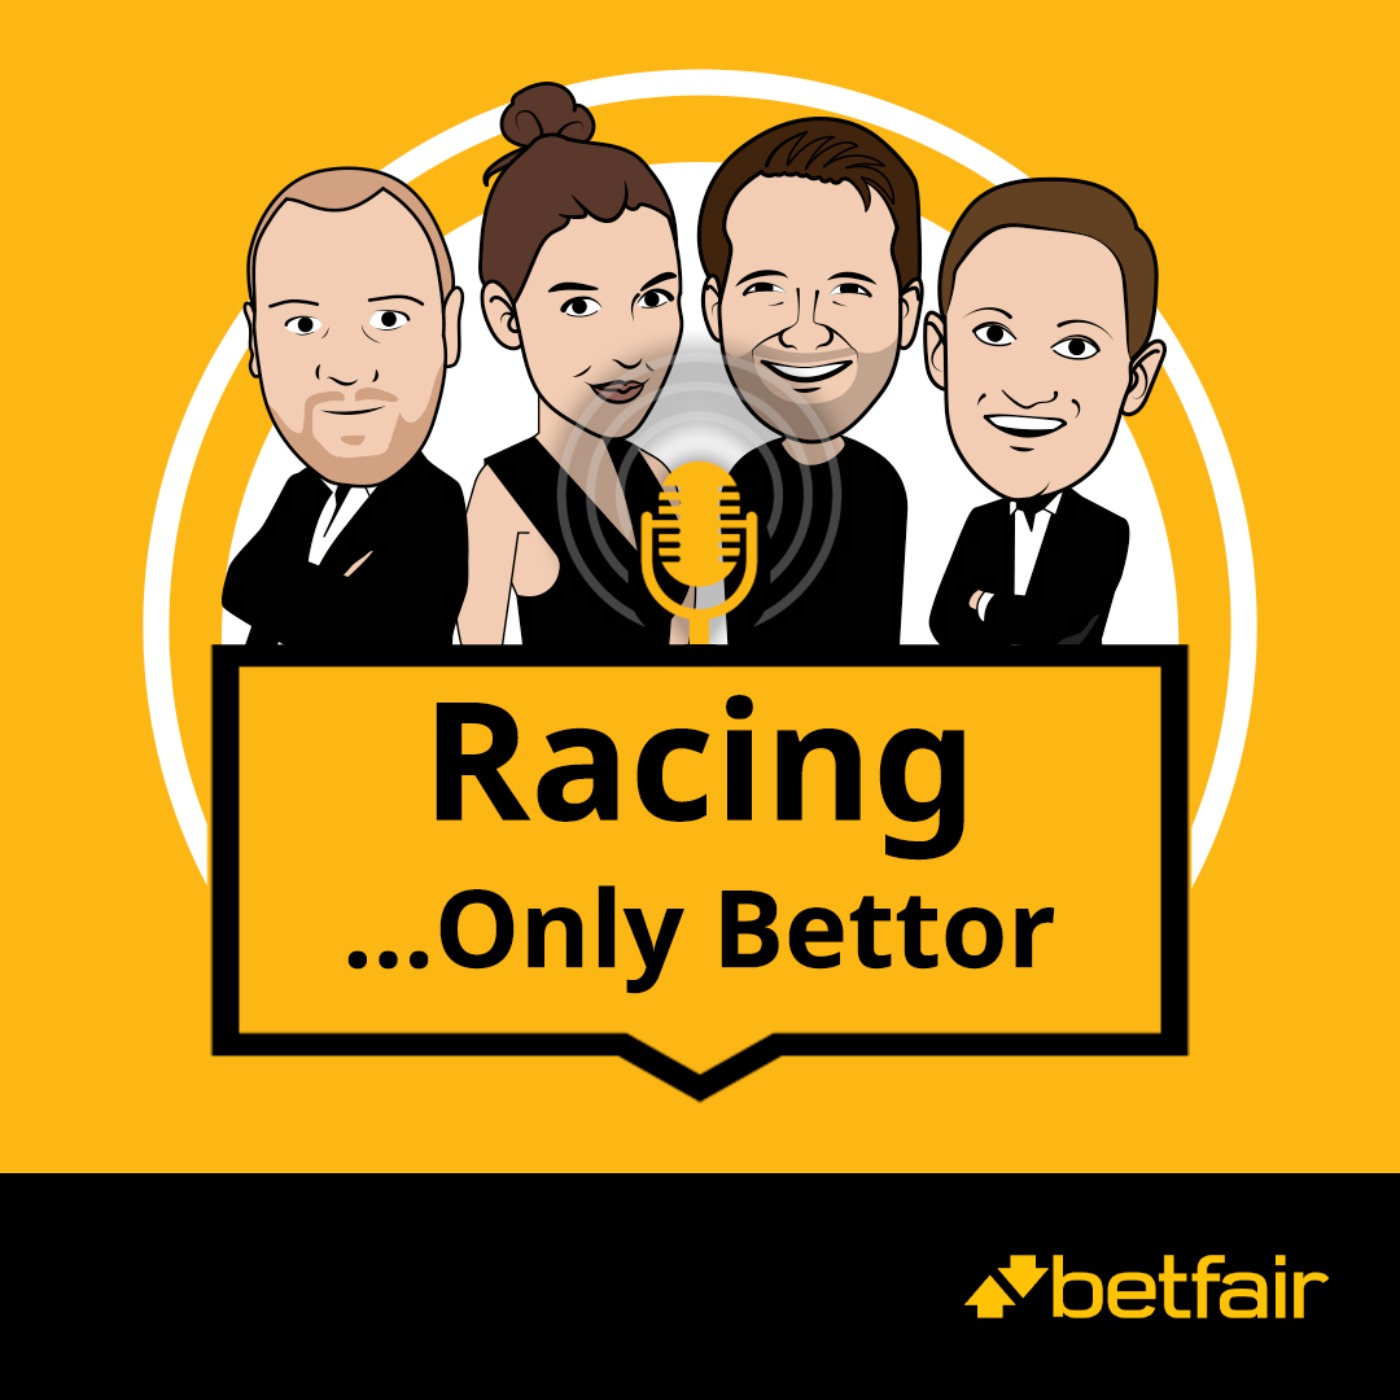 Royal Ascot Day 4 | Racing…Only Bettor